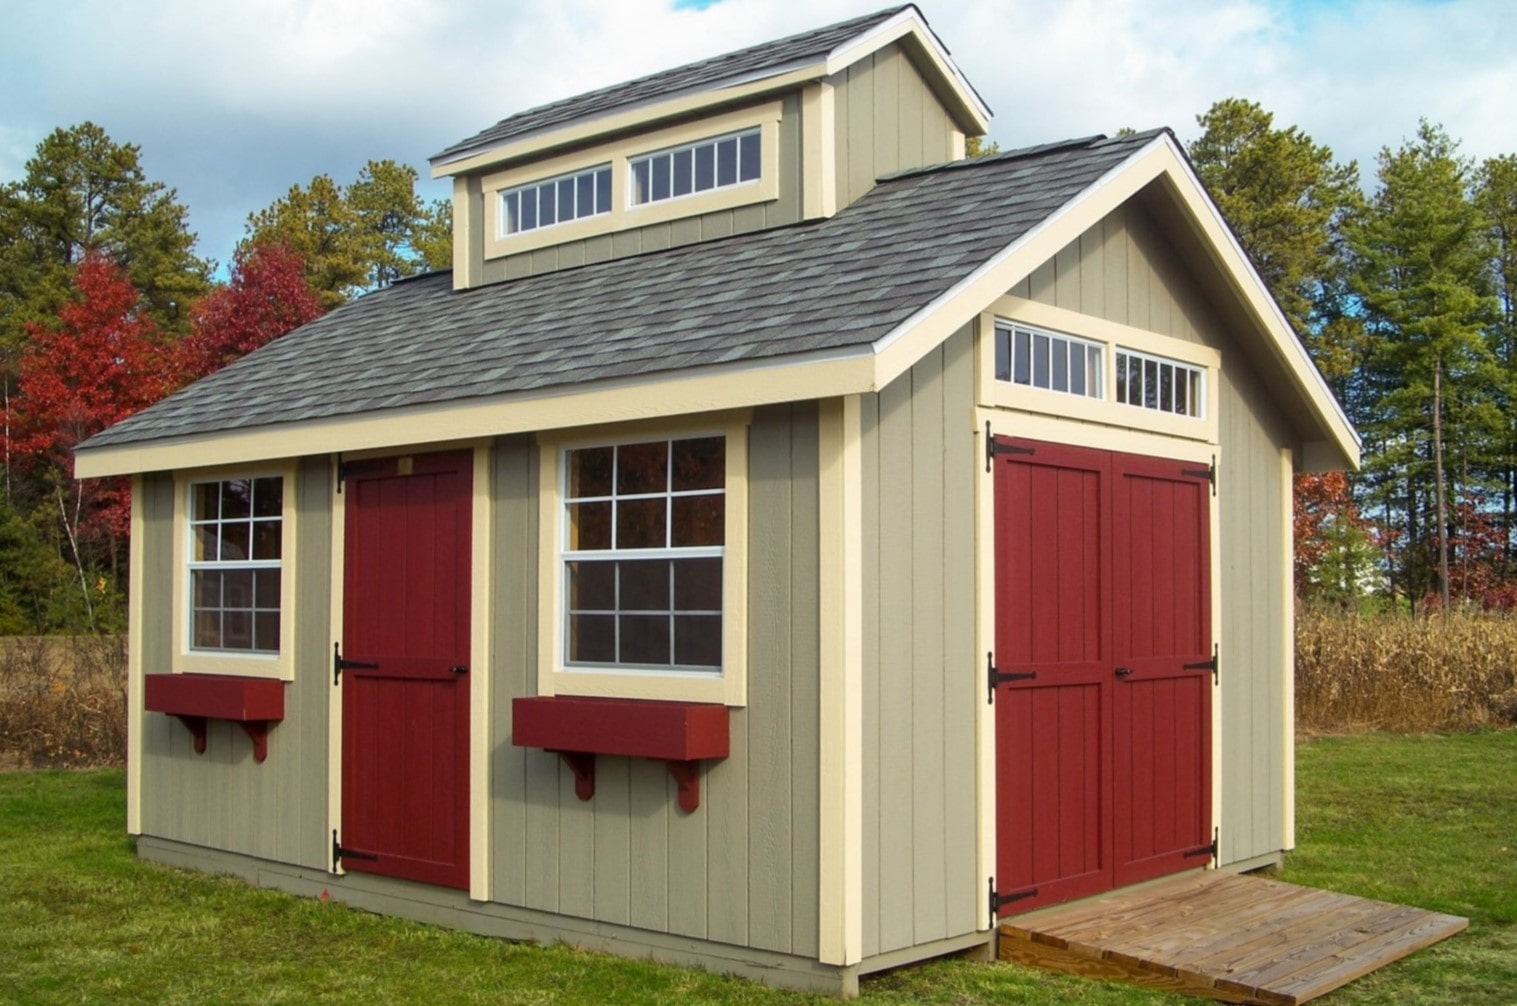 How Many Square Feet Is A 10X12 Shed